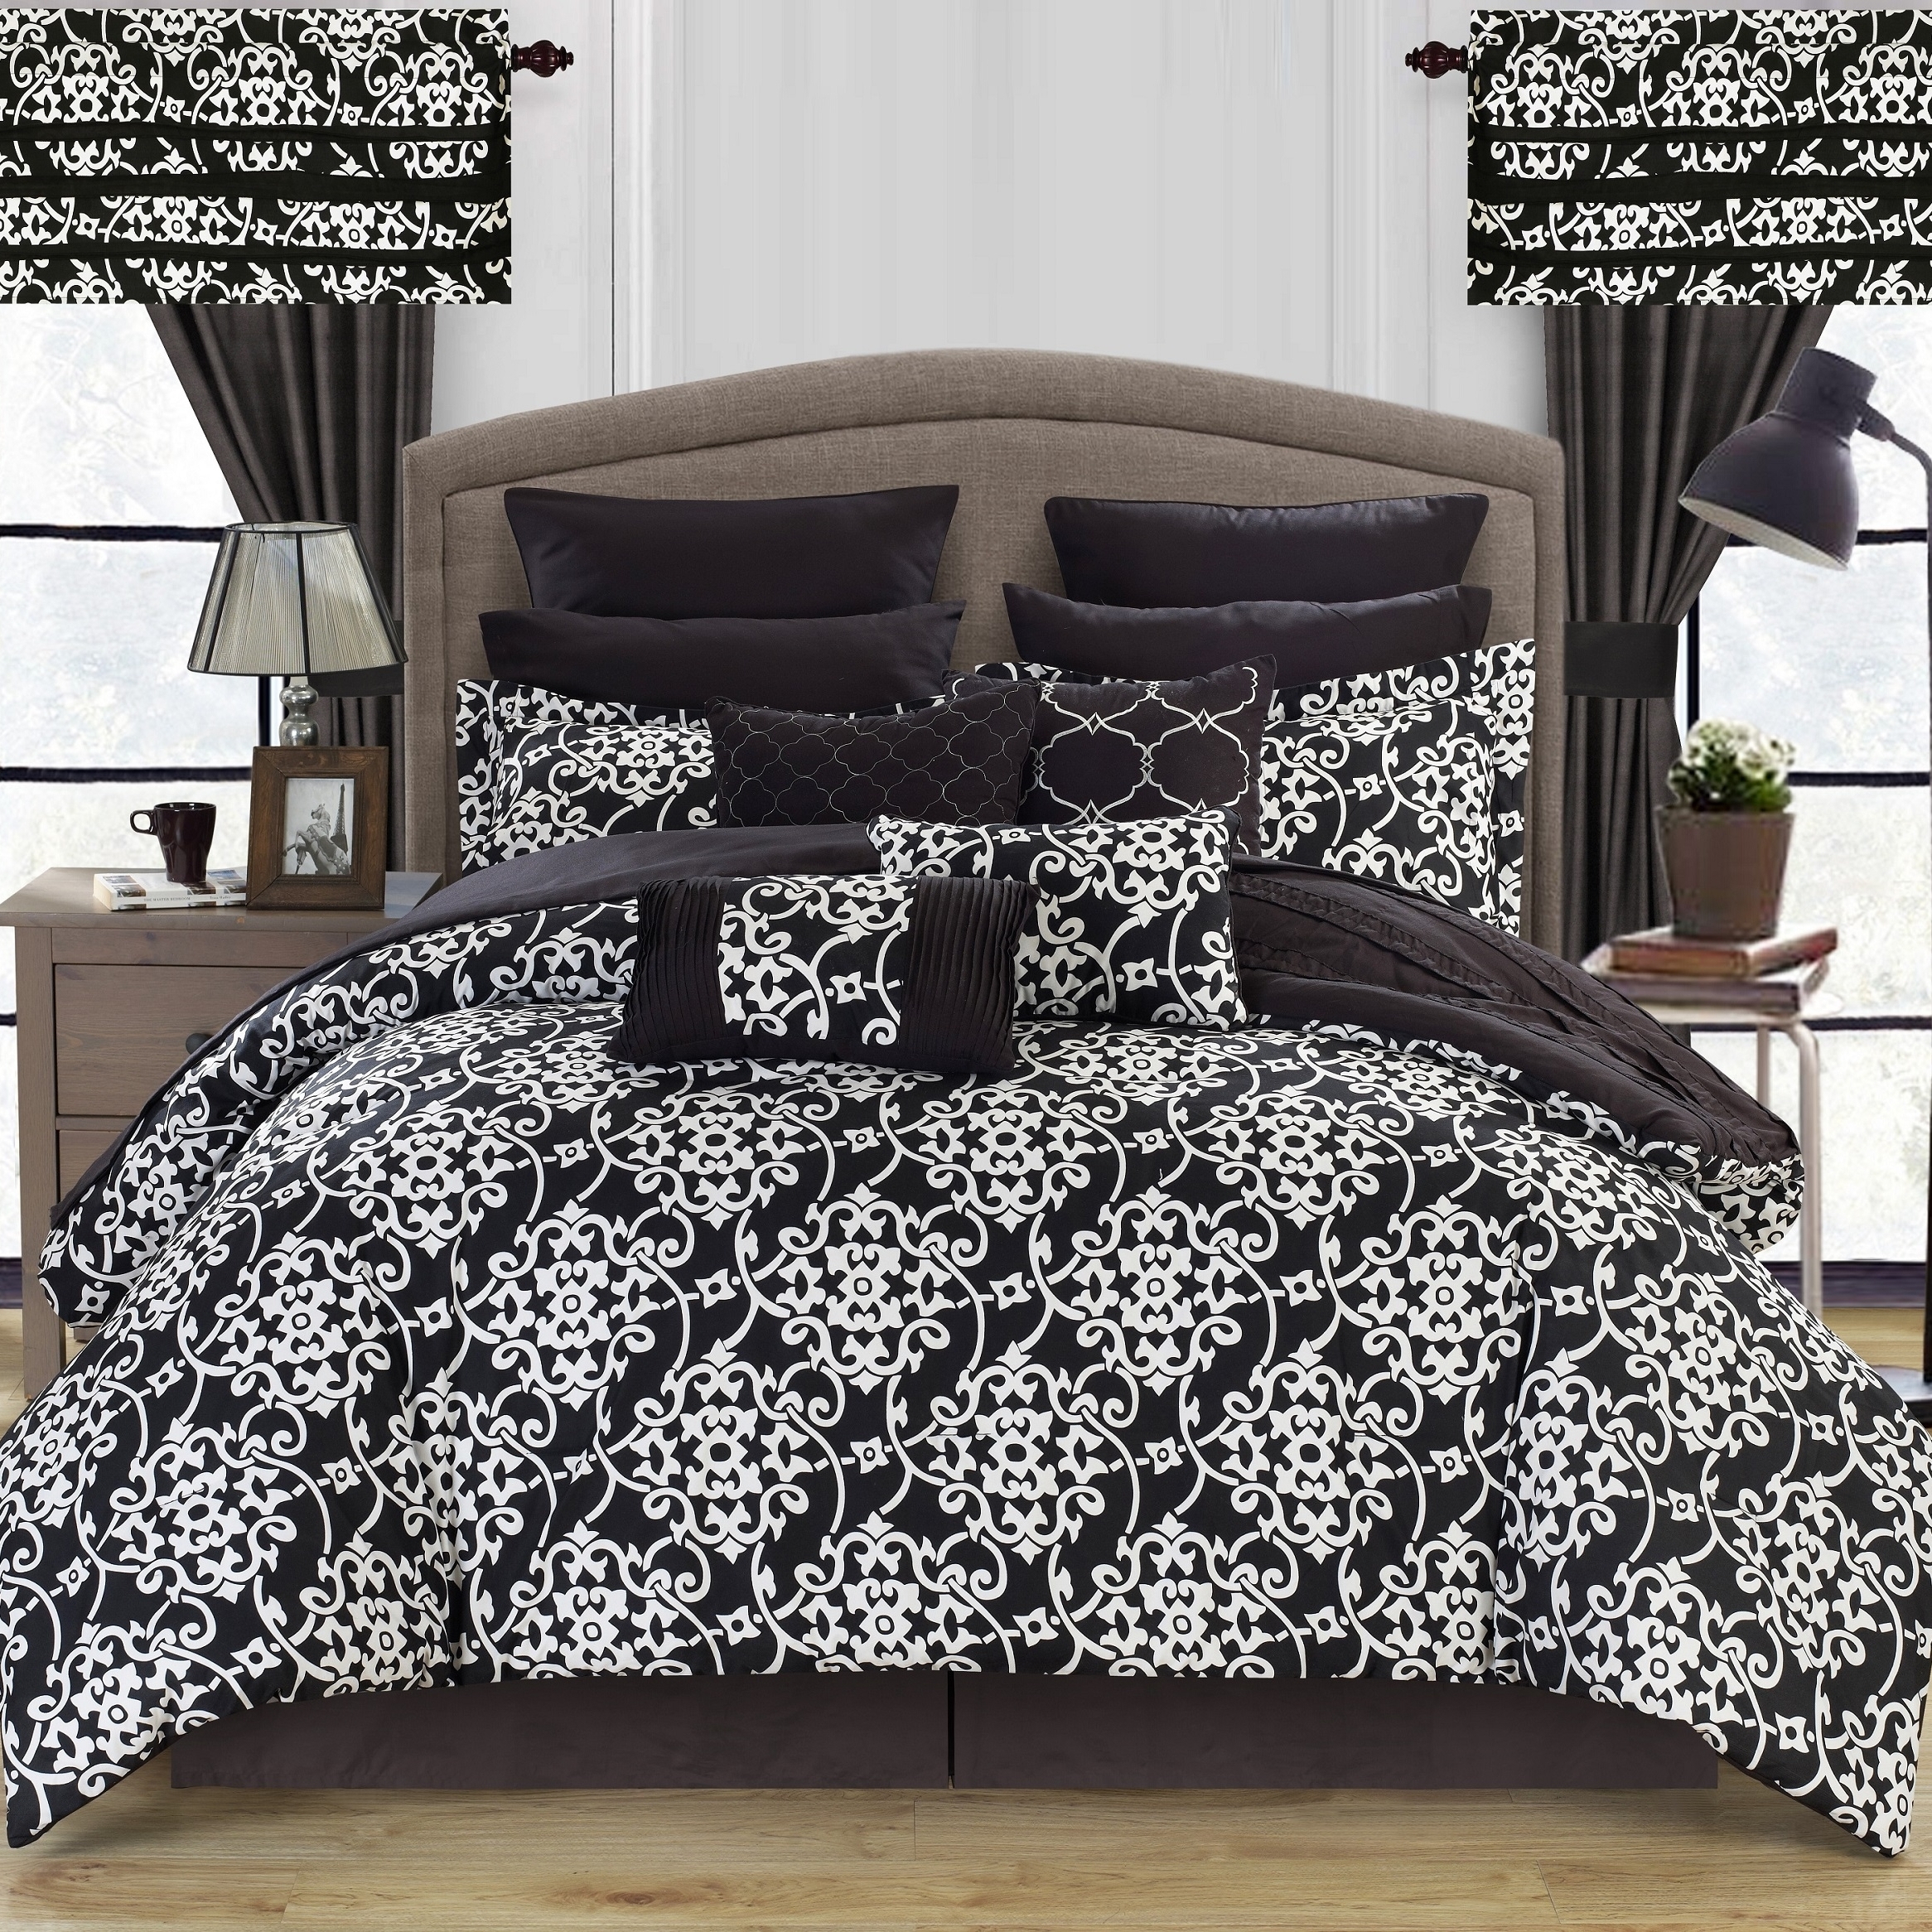 24 Piece Hailee Reversible Printed 2-in-1 Look Comforter Set Includes Sheets - Black, King